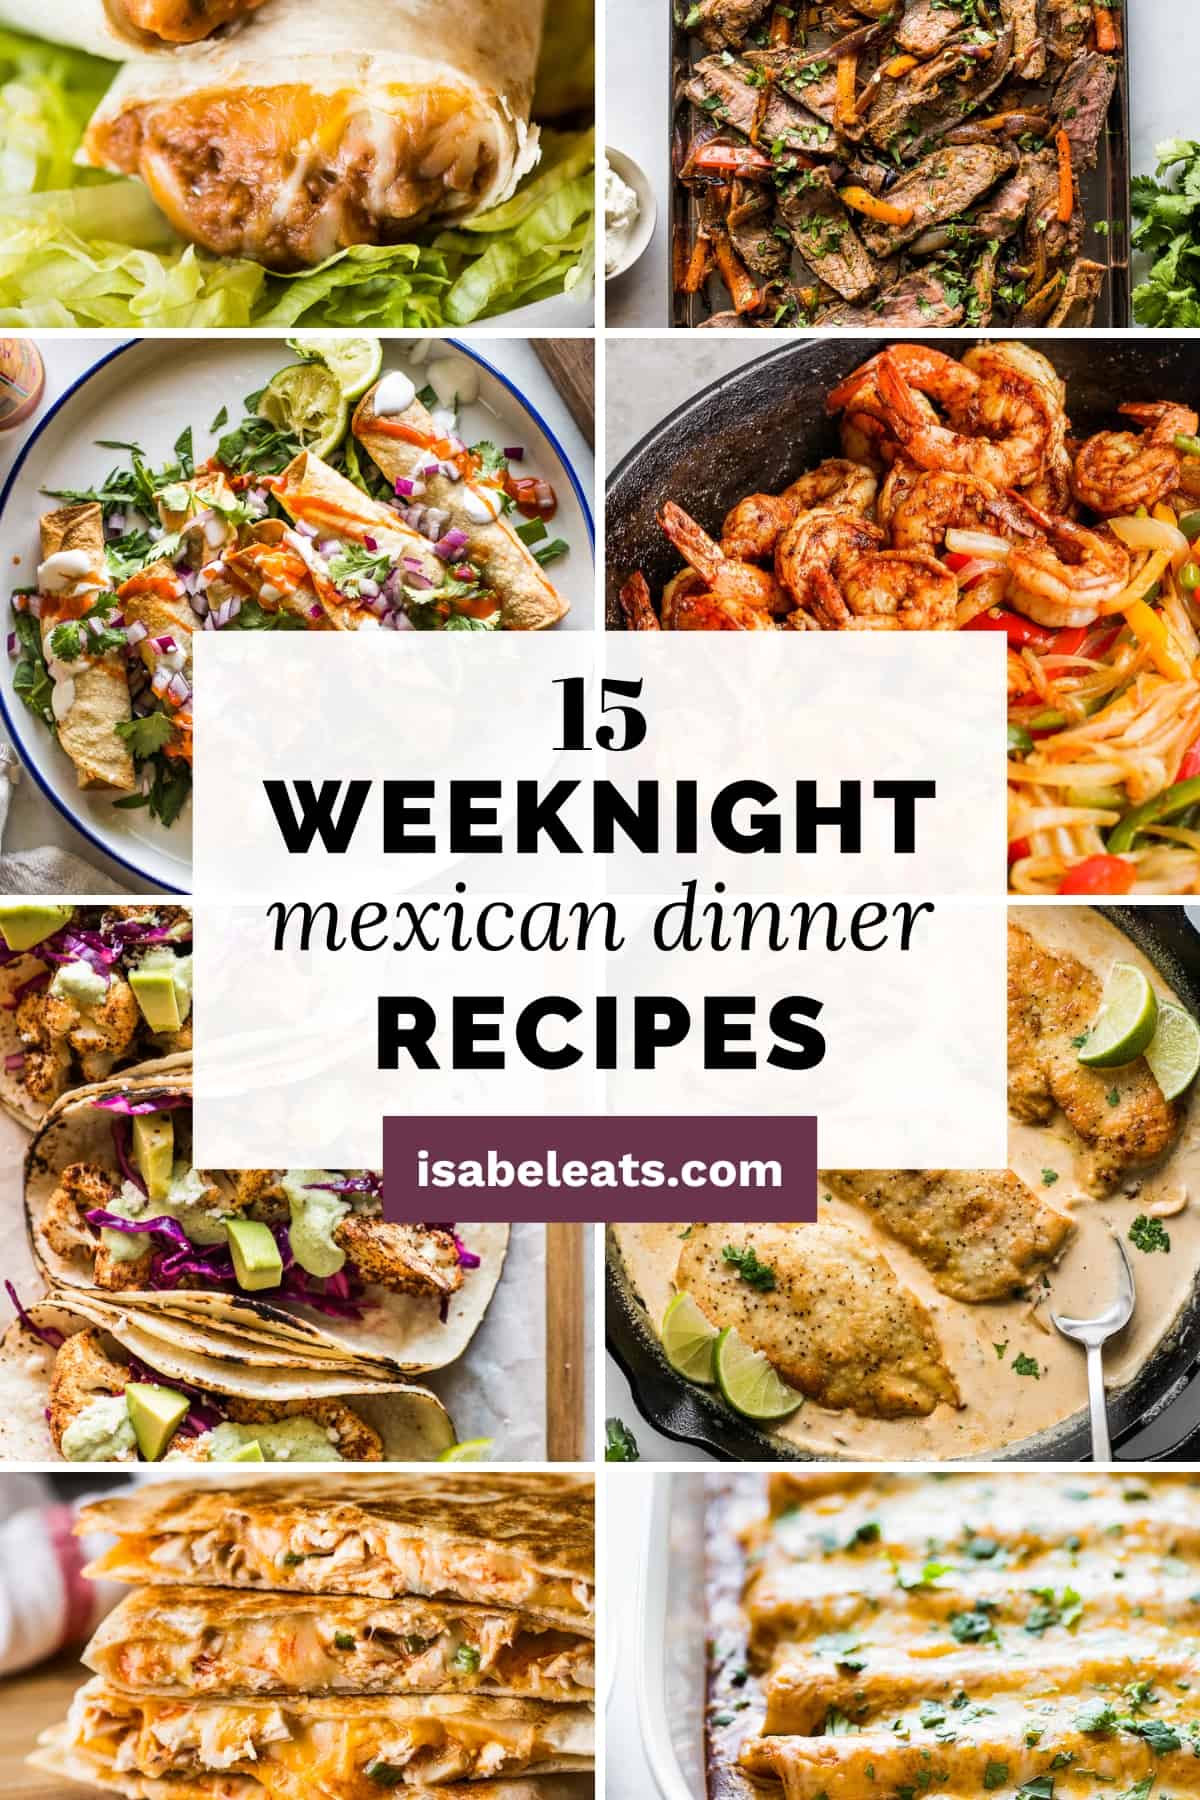 15 Weeknight Mexican Dinner Recipes